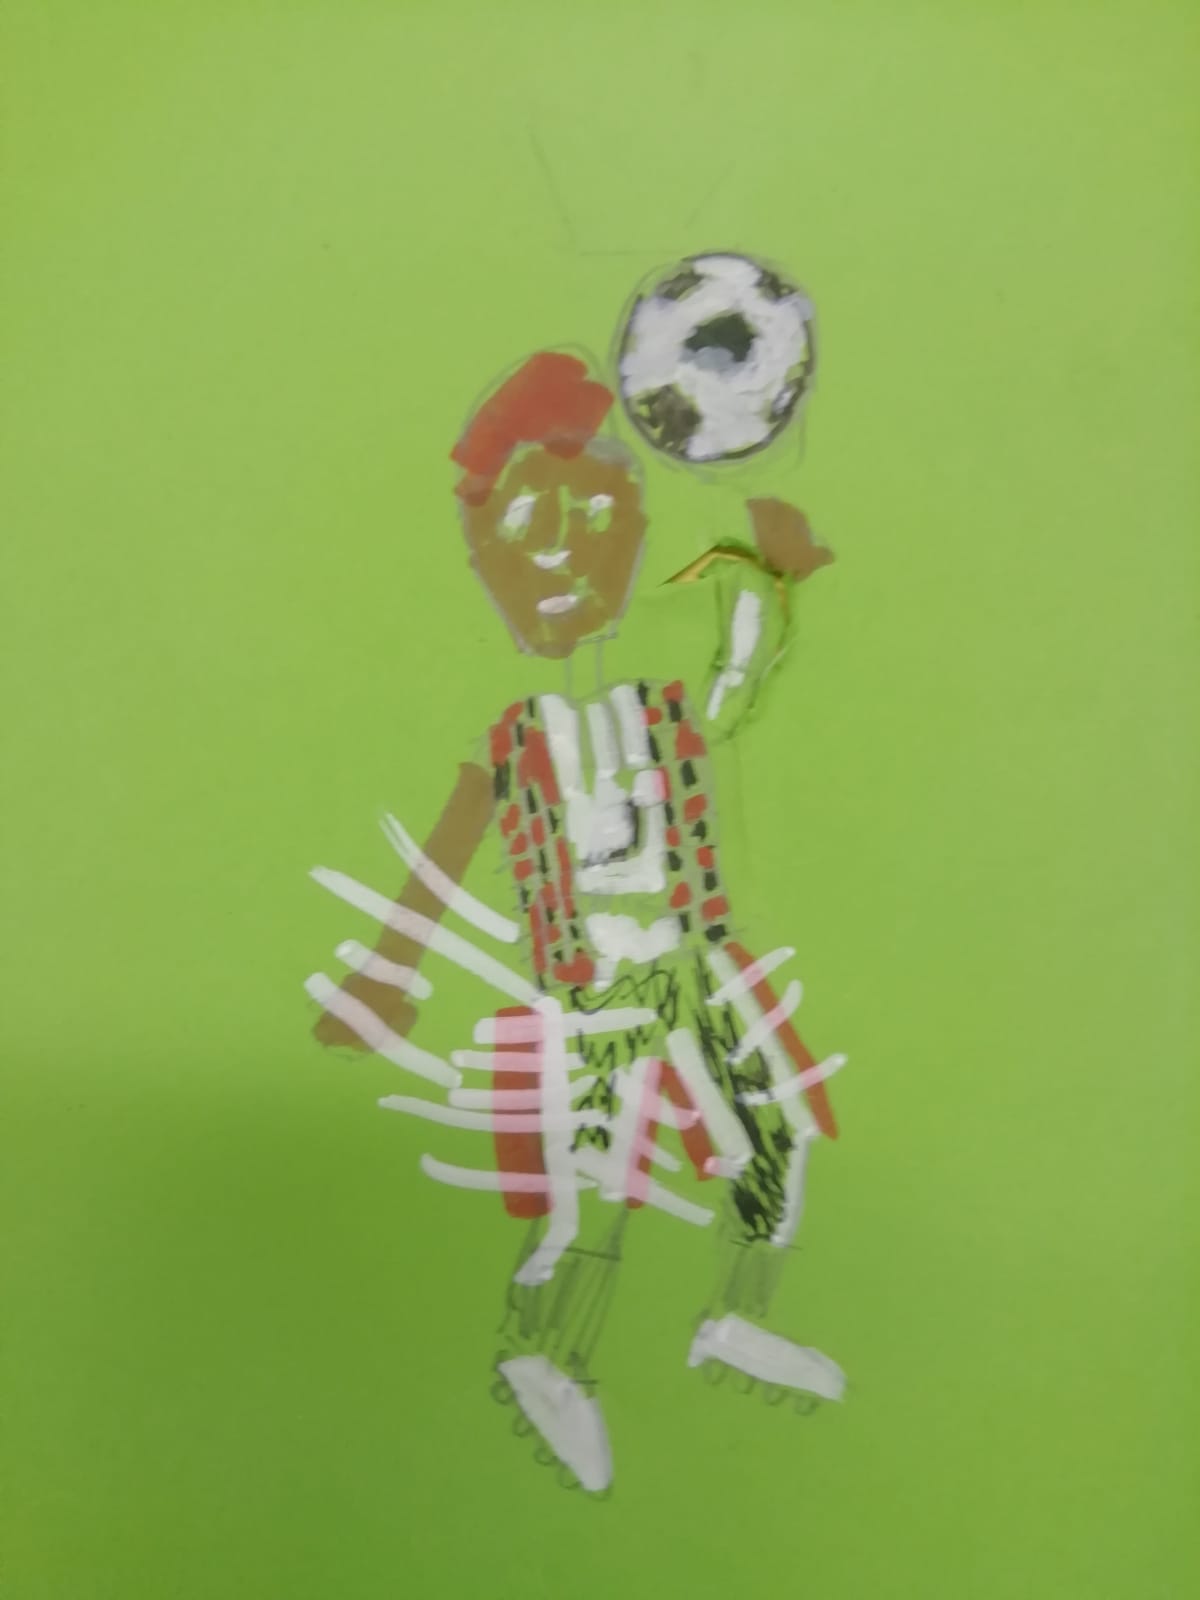 A cartoon of a footballer with red hair, wearing red, black and white kit and white boots, flicking a black and white ball in the air